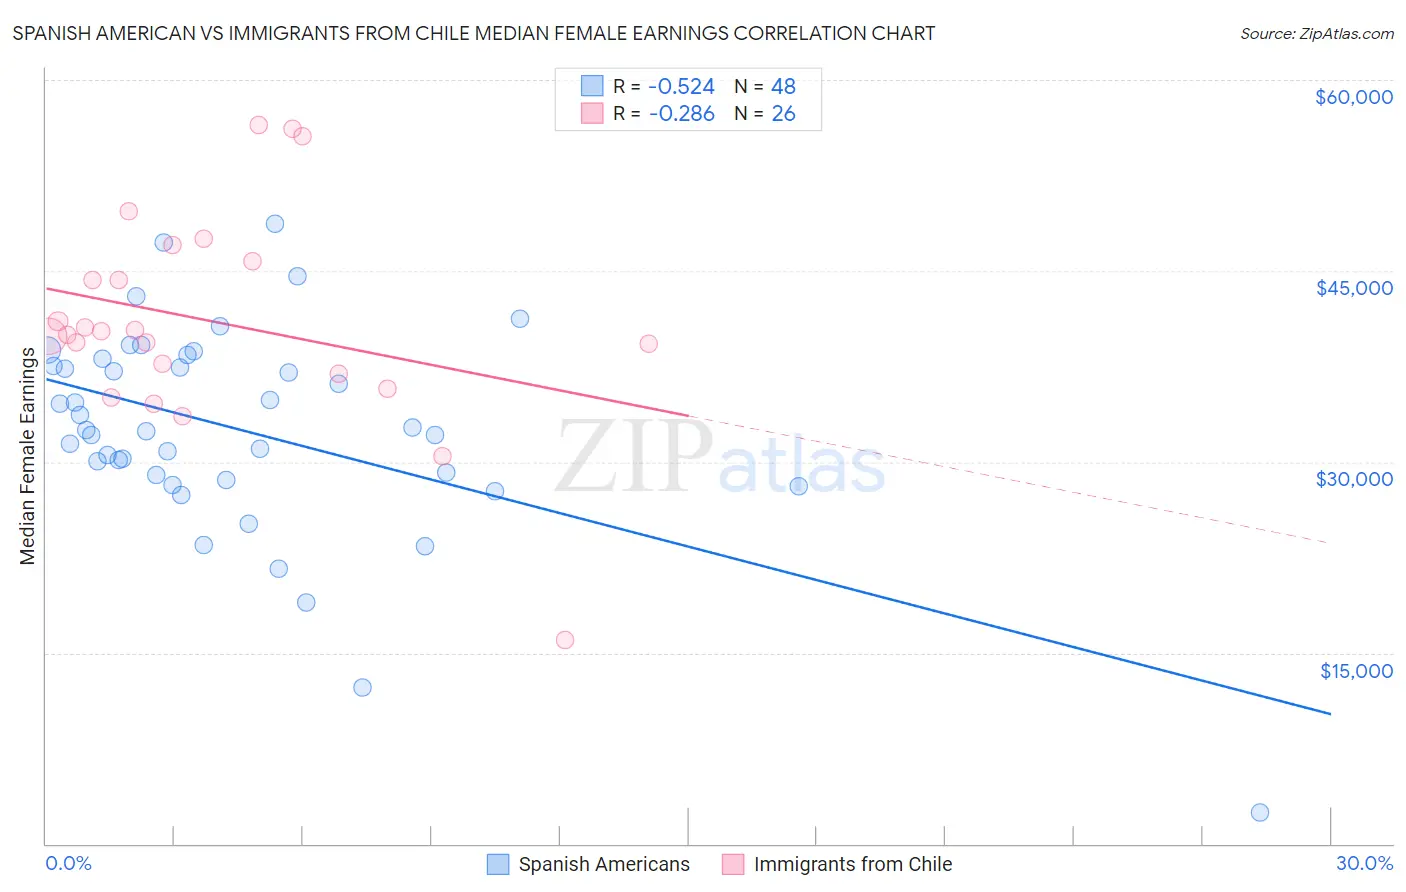 Spanish American vs Immigrants from Chile Median Female Earnings